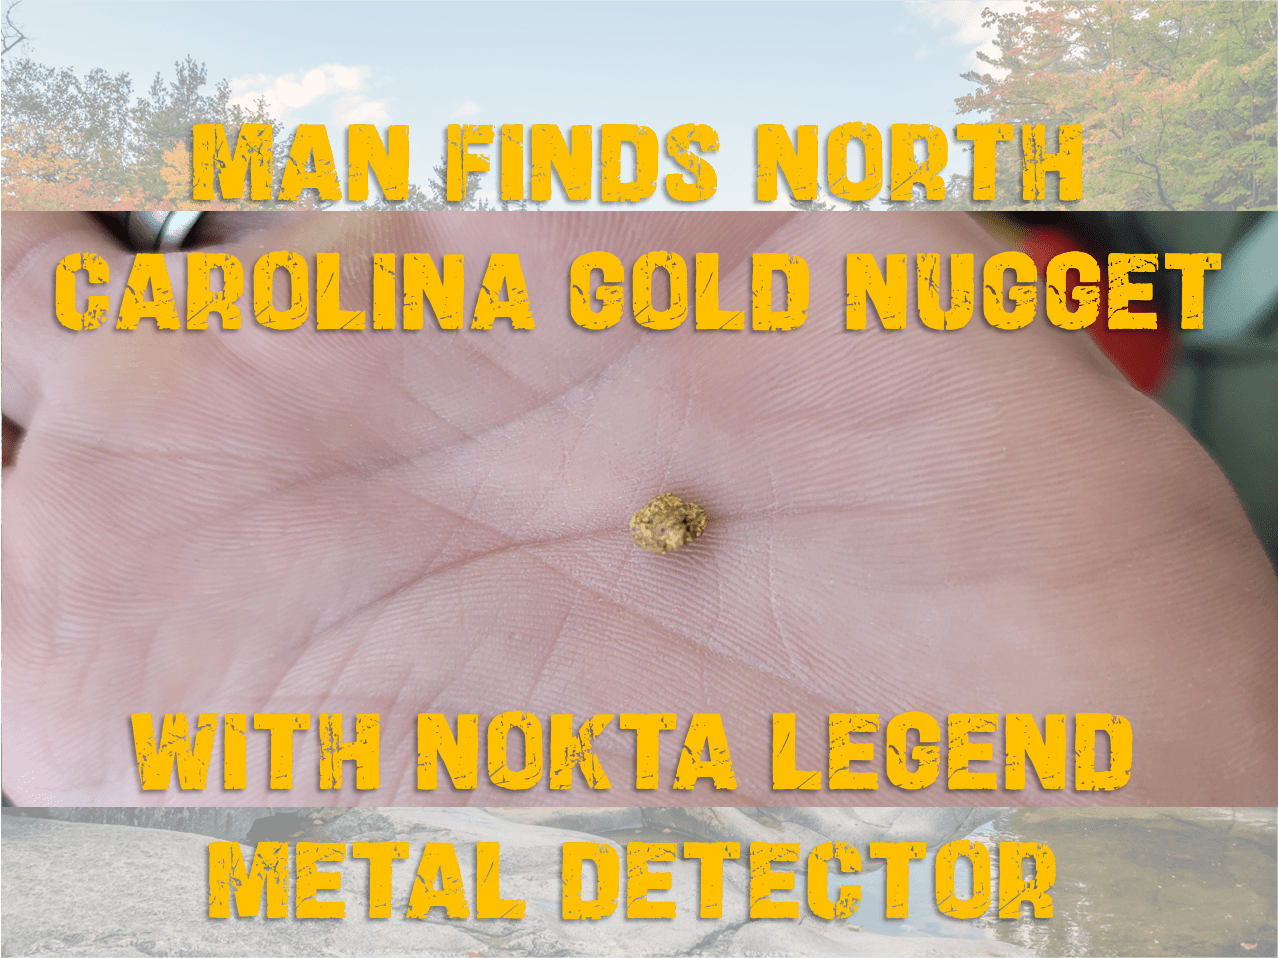 Gold Nugget Found With Nokta Legend Metal Detector in North Carolina! - Customer Finds Submission